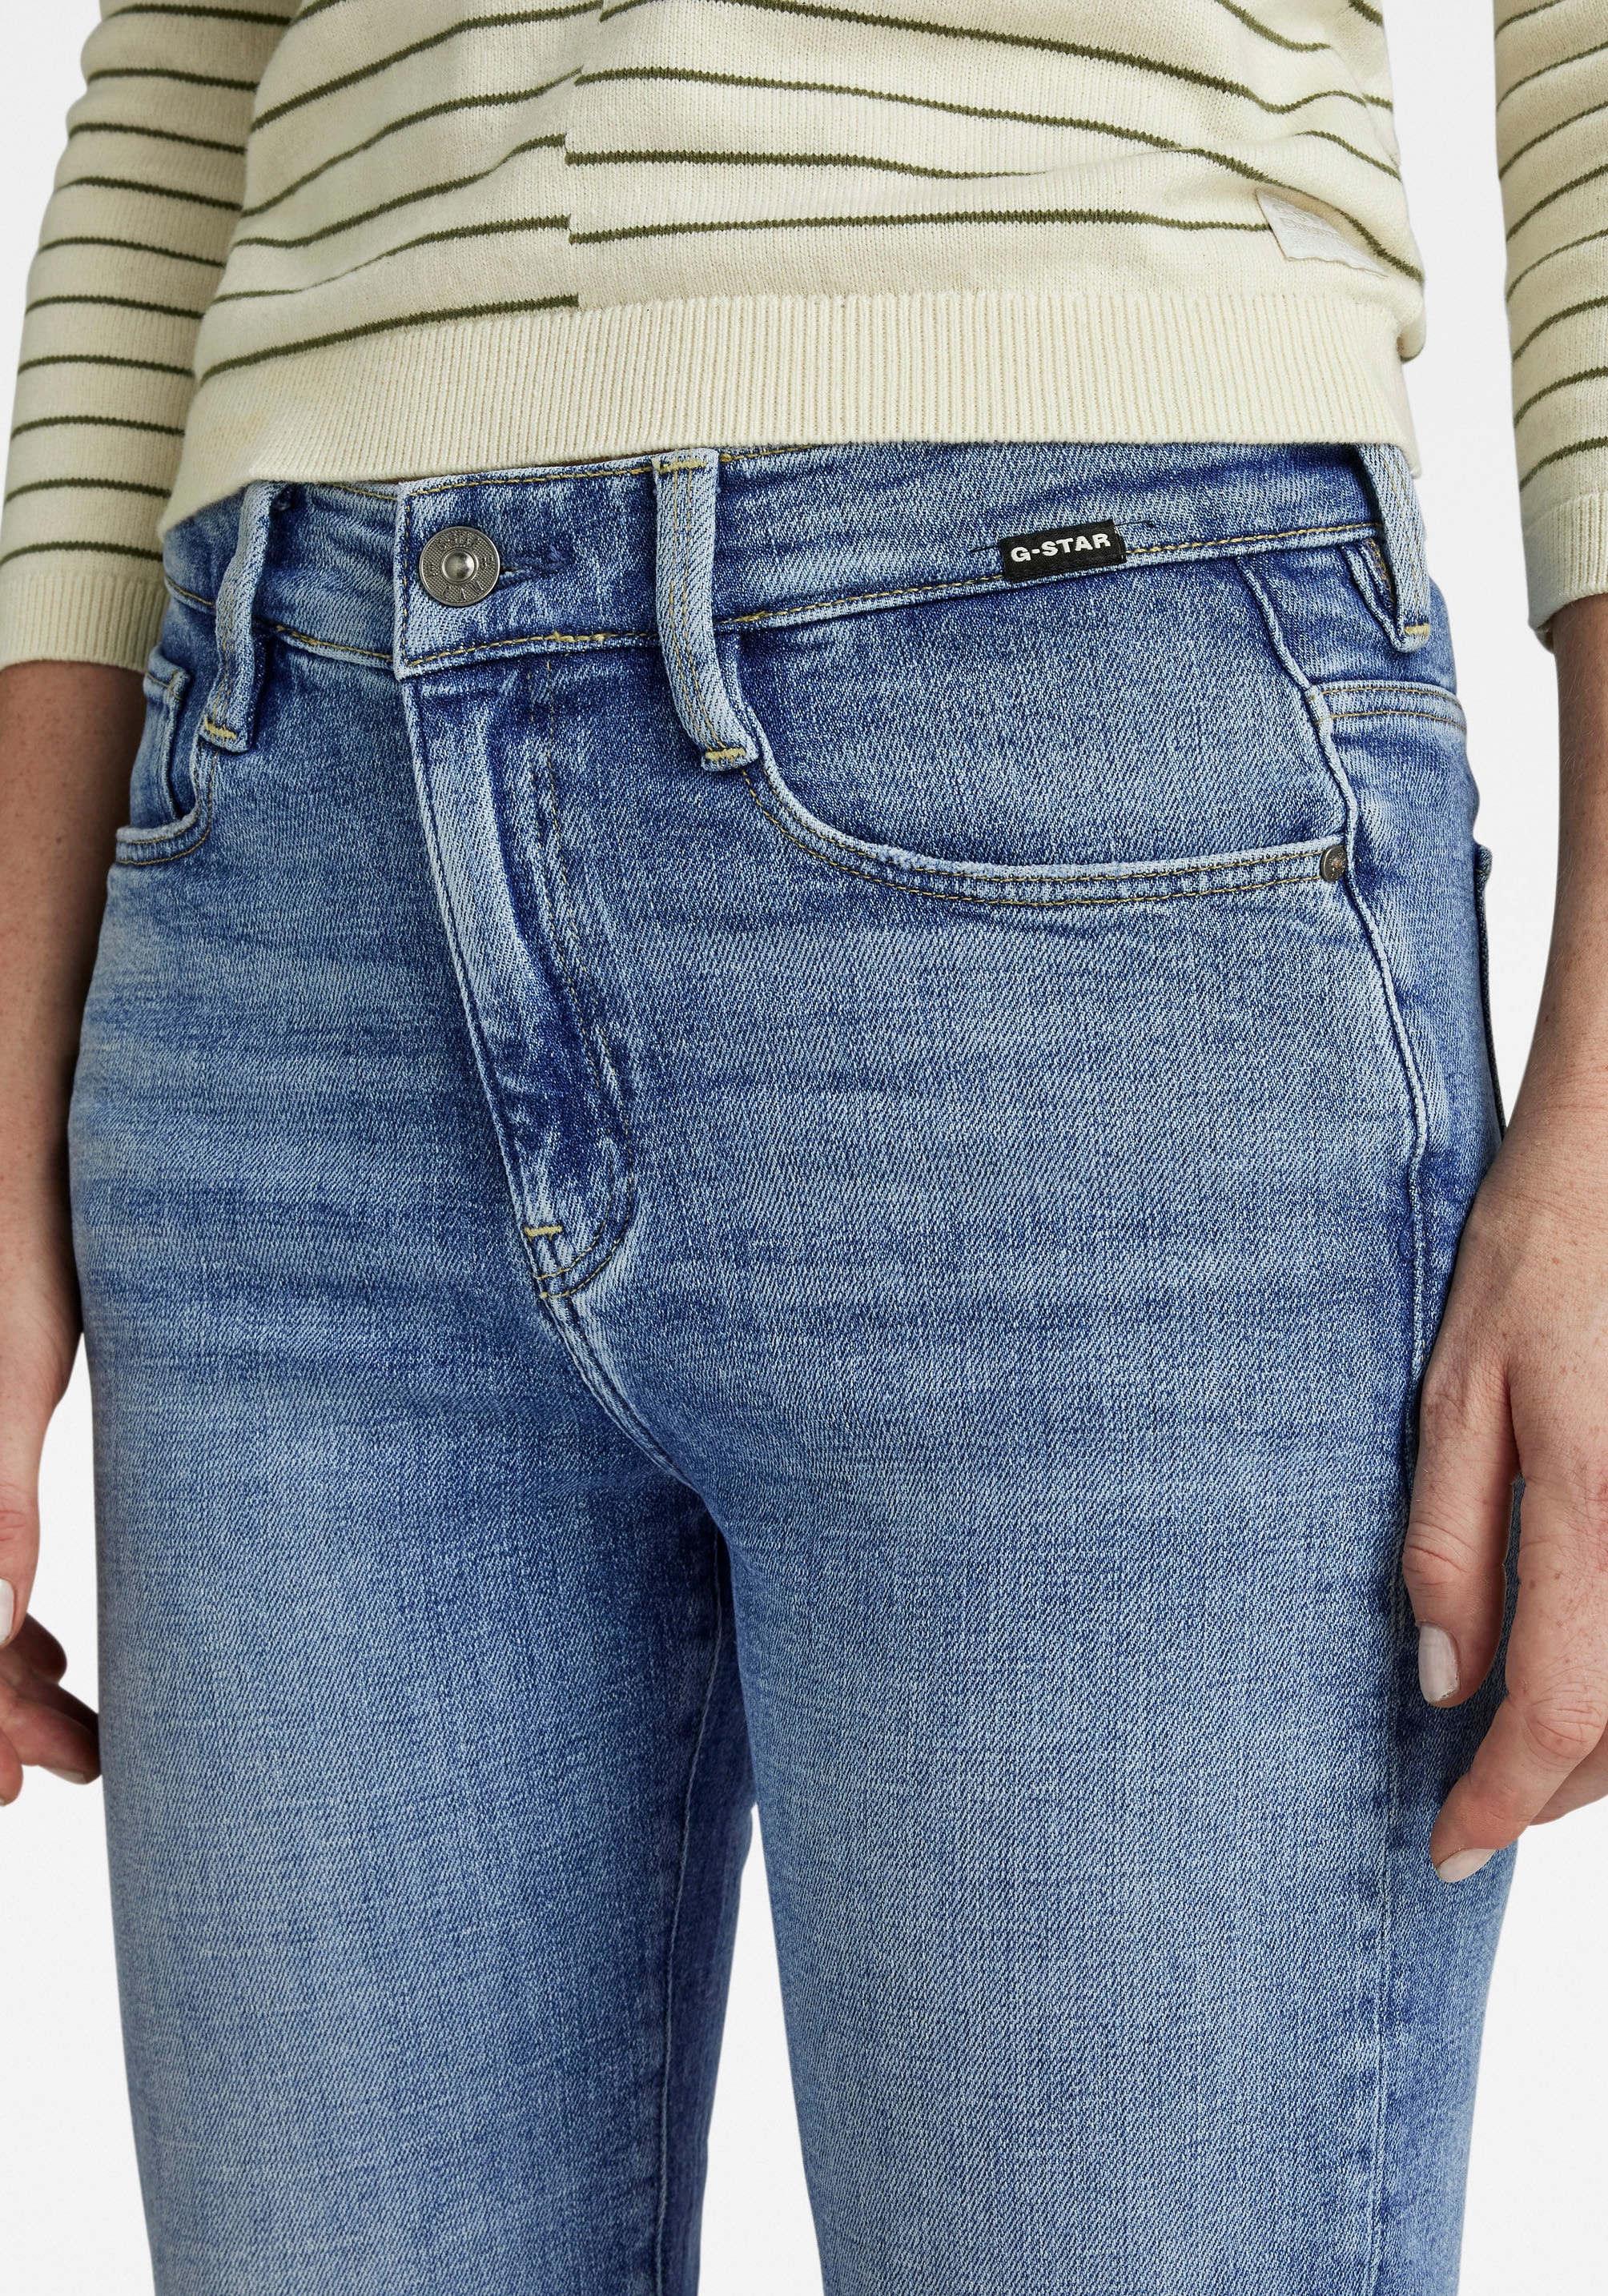 G-Star RAW Straight-Jeans »Strace Straight Wmn«